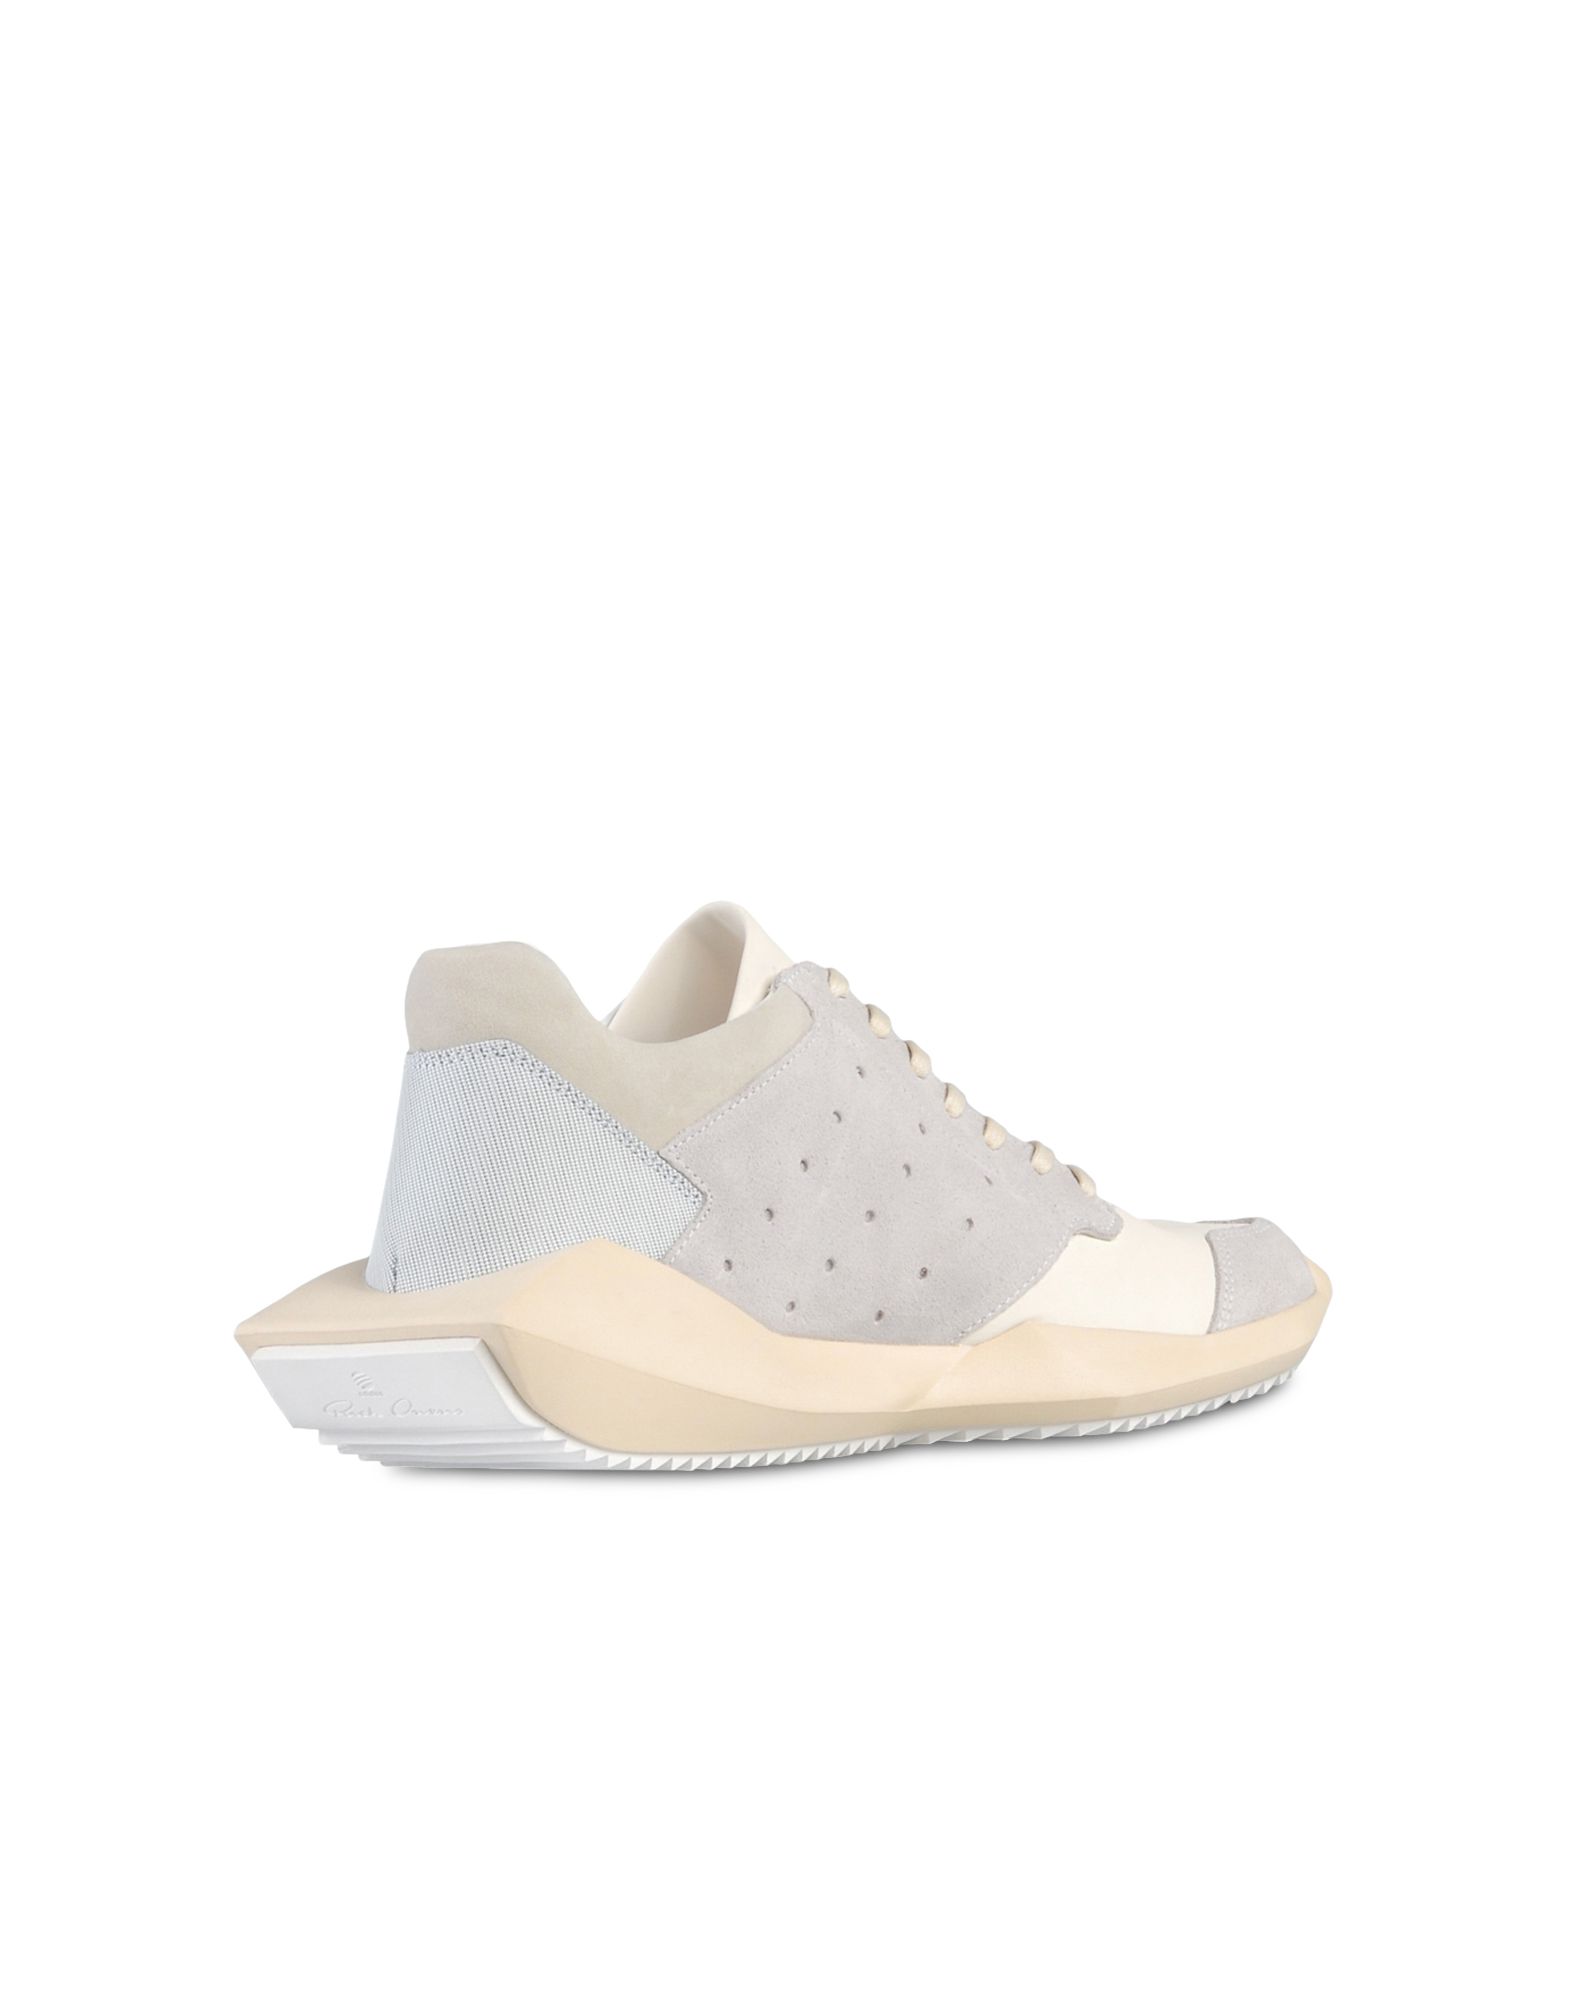 Adidas By Rick Owens Tech Runner Sneakers | Adidas Y-3 Official Store